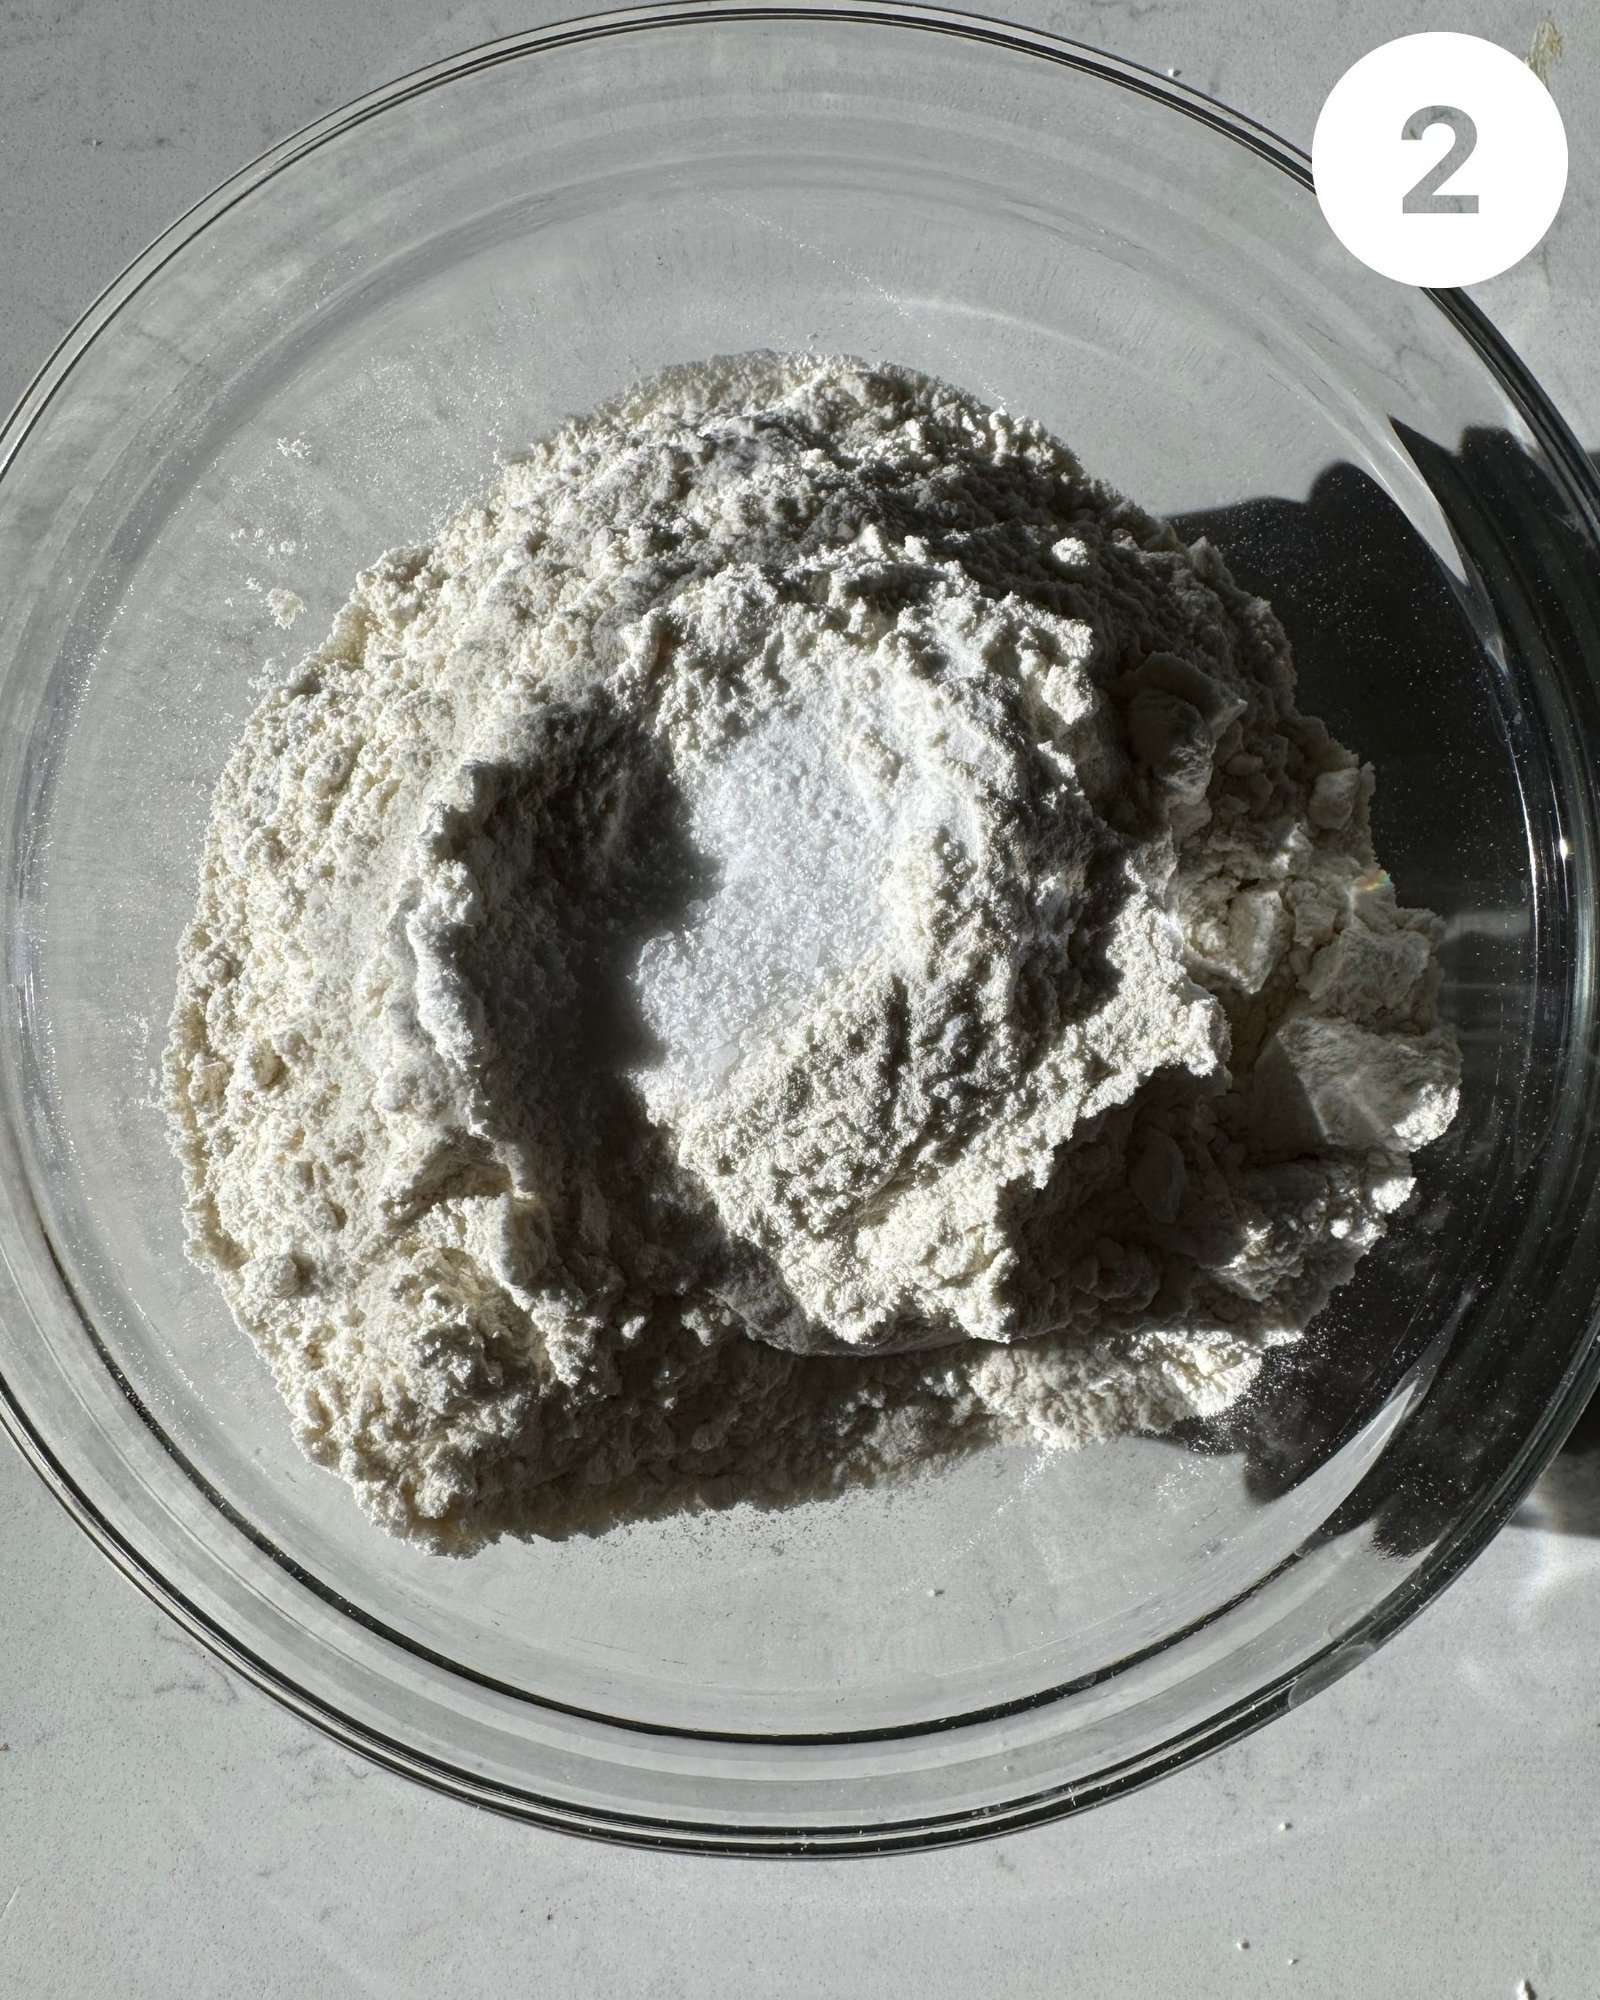 flour, baking soda, and salt mixed together in a mixing bowl